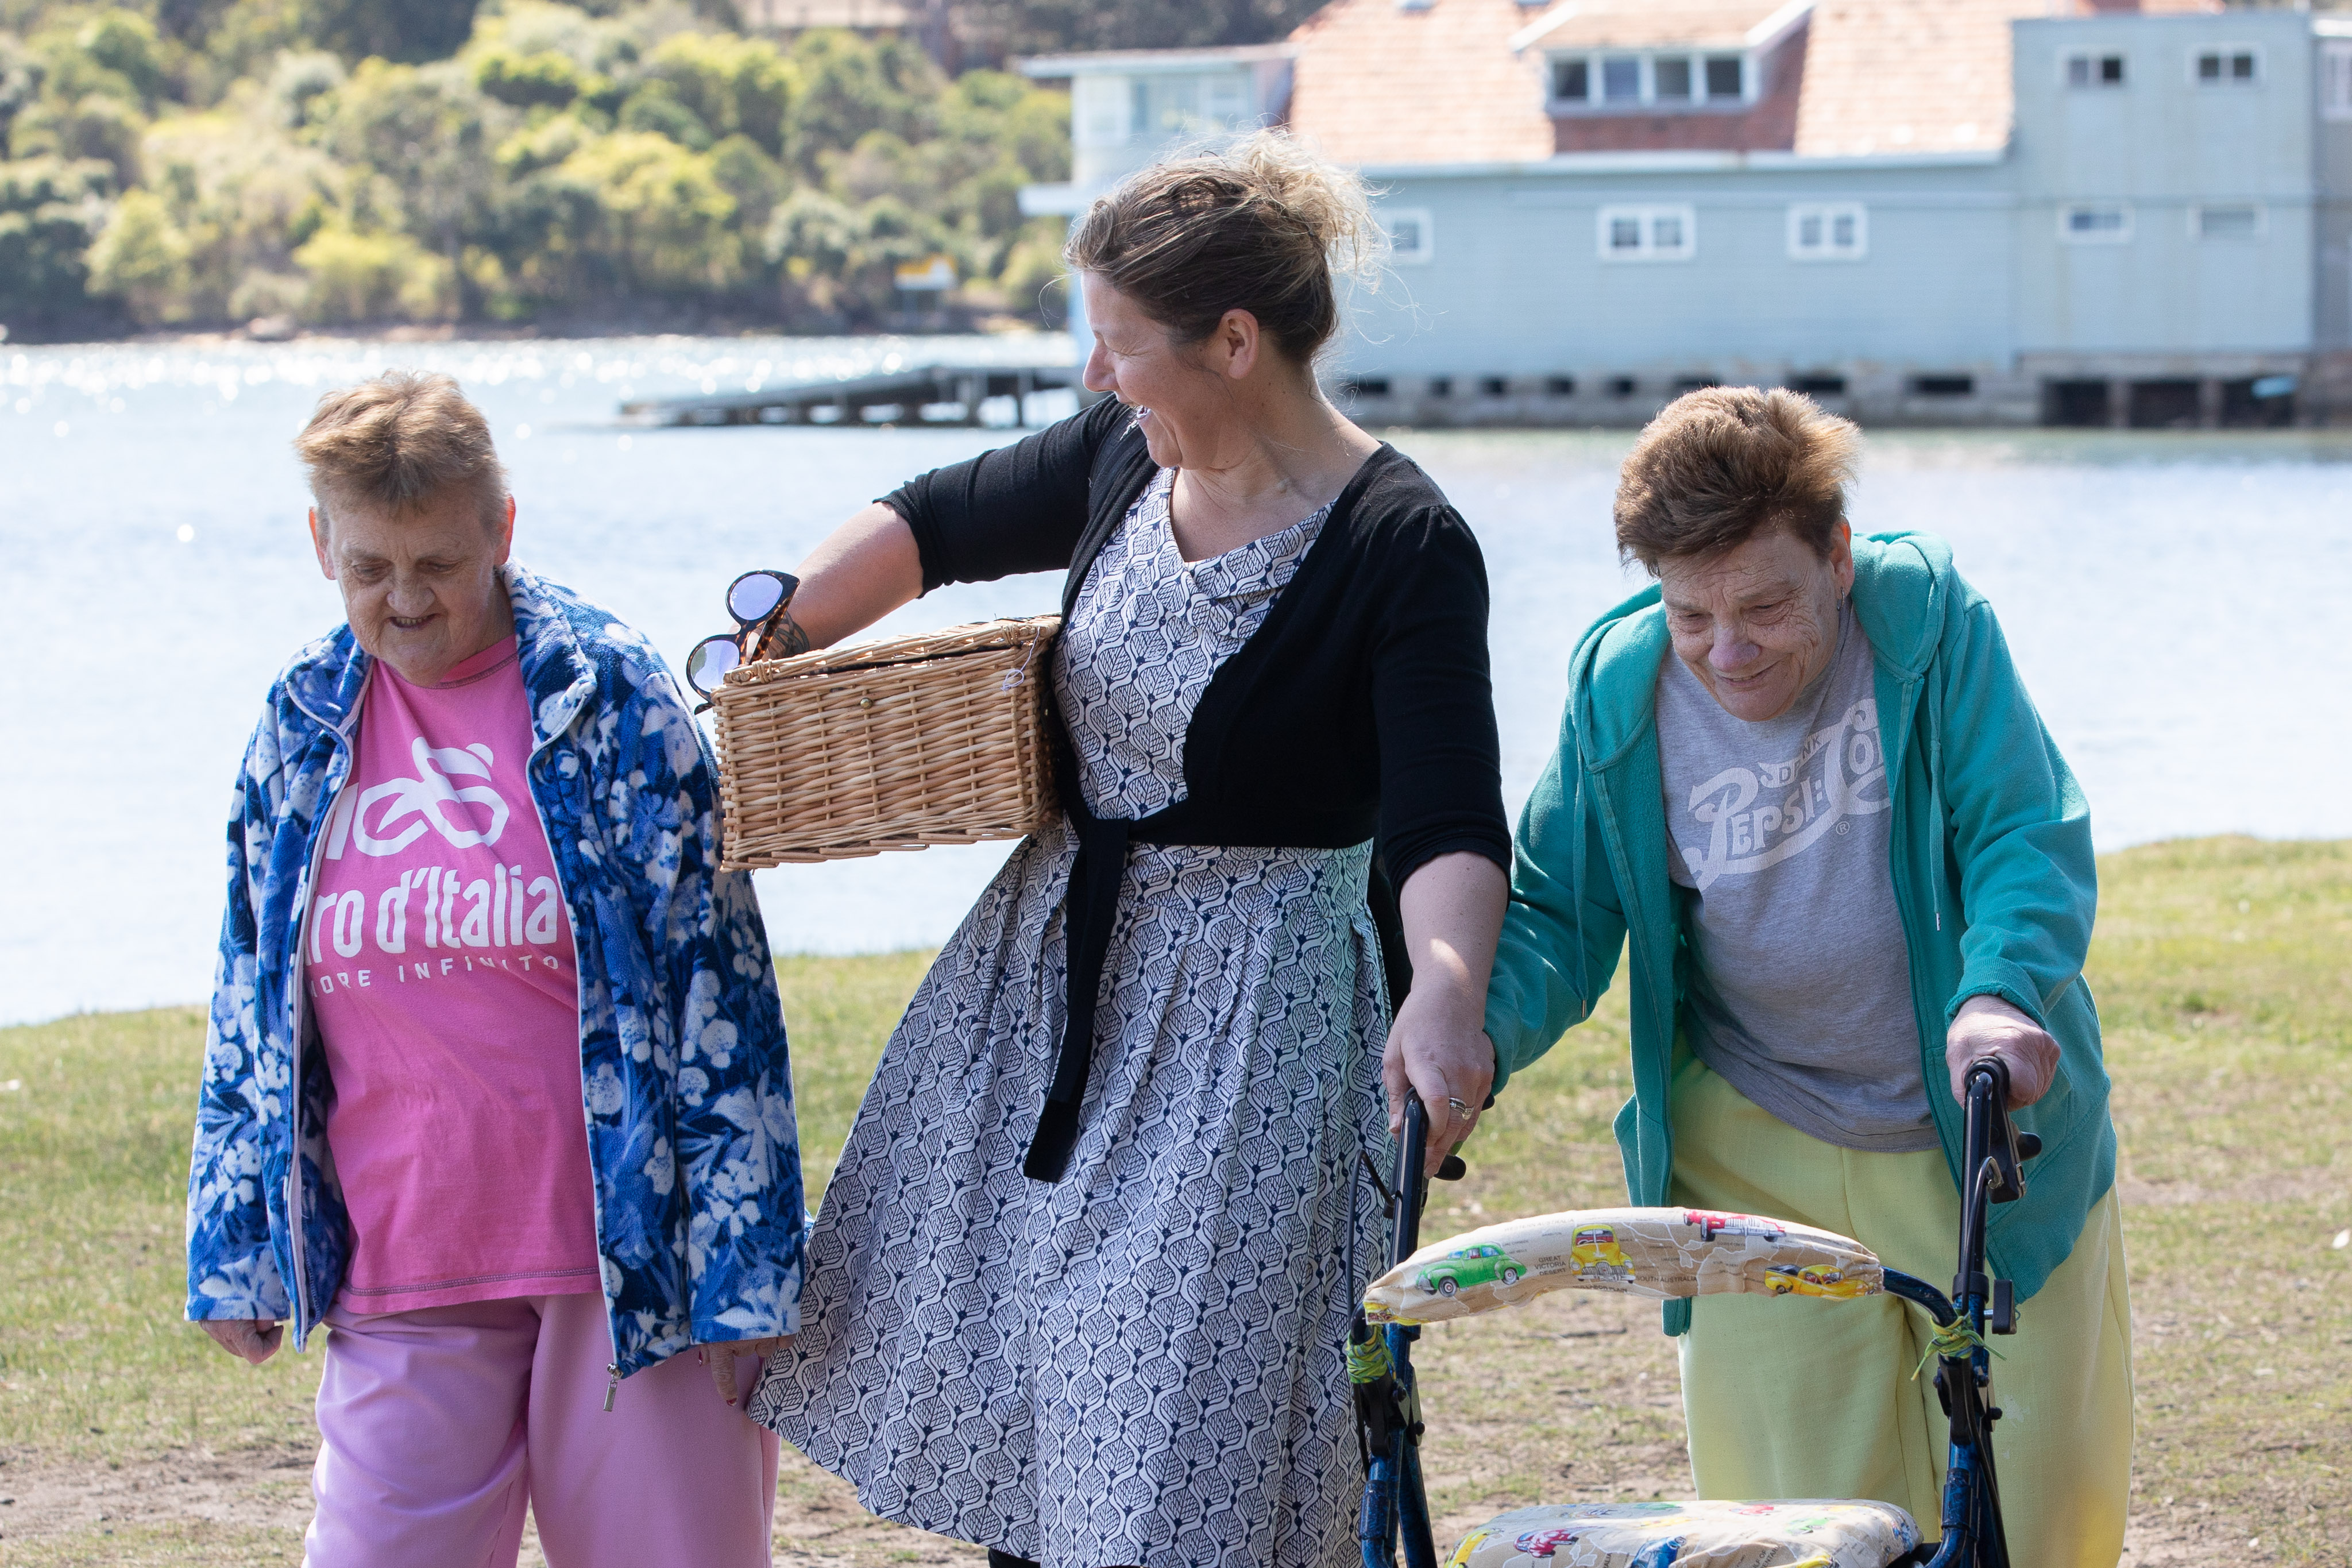 Three women are walking on a sunny day, chatting. They are walking past a bay, one woman is carrying a picnic basket, another is using a walker to assist her. 